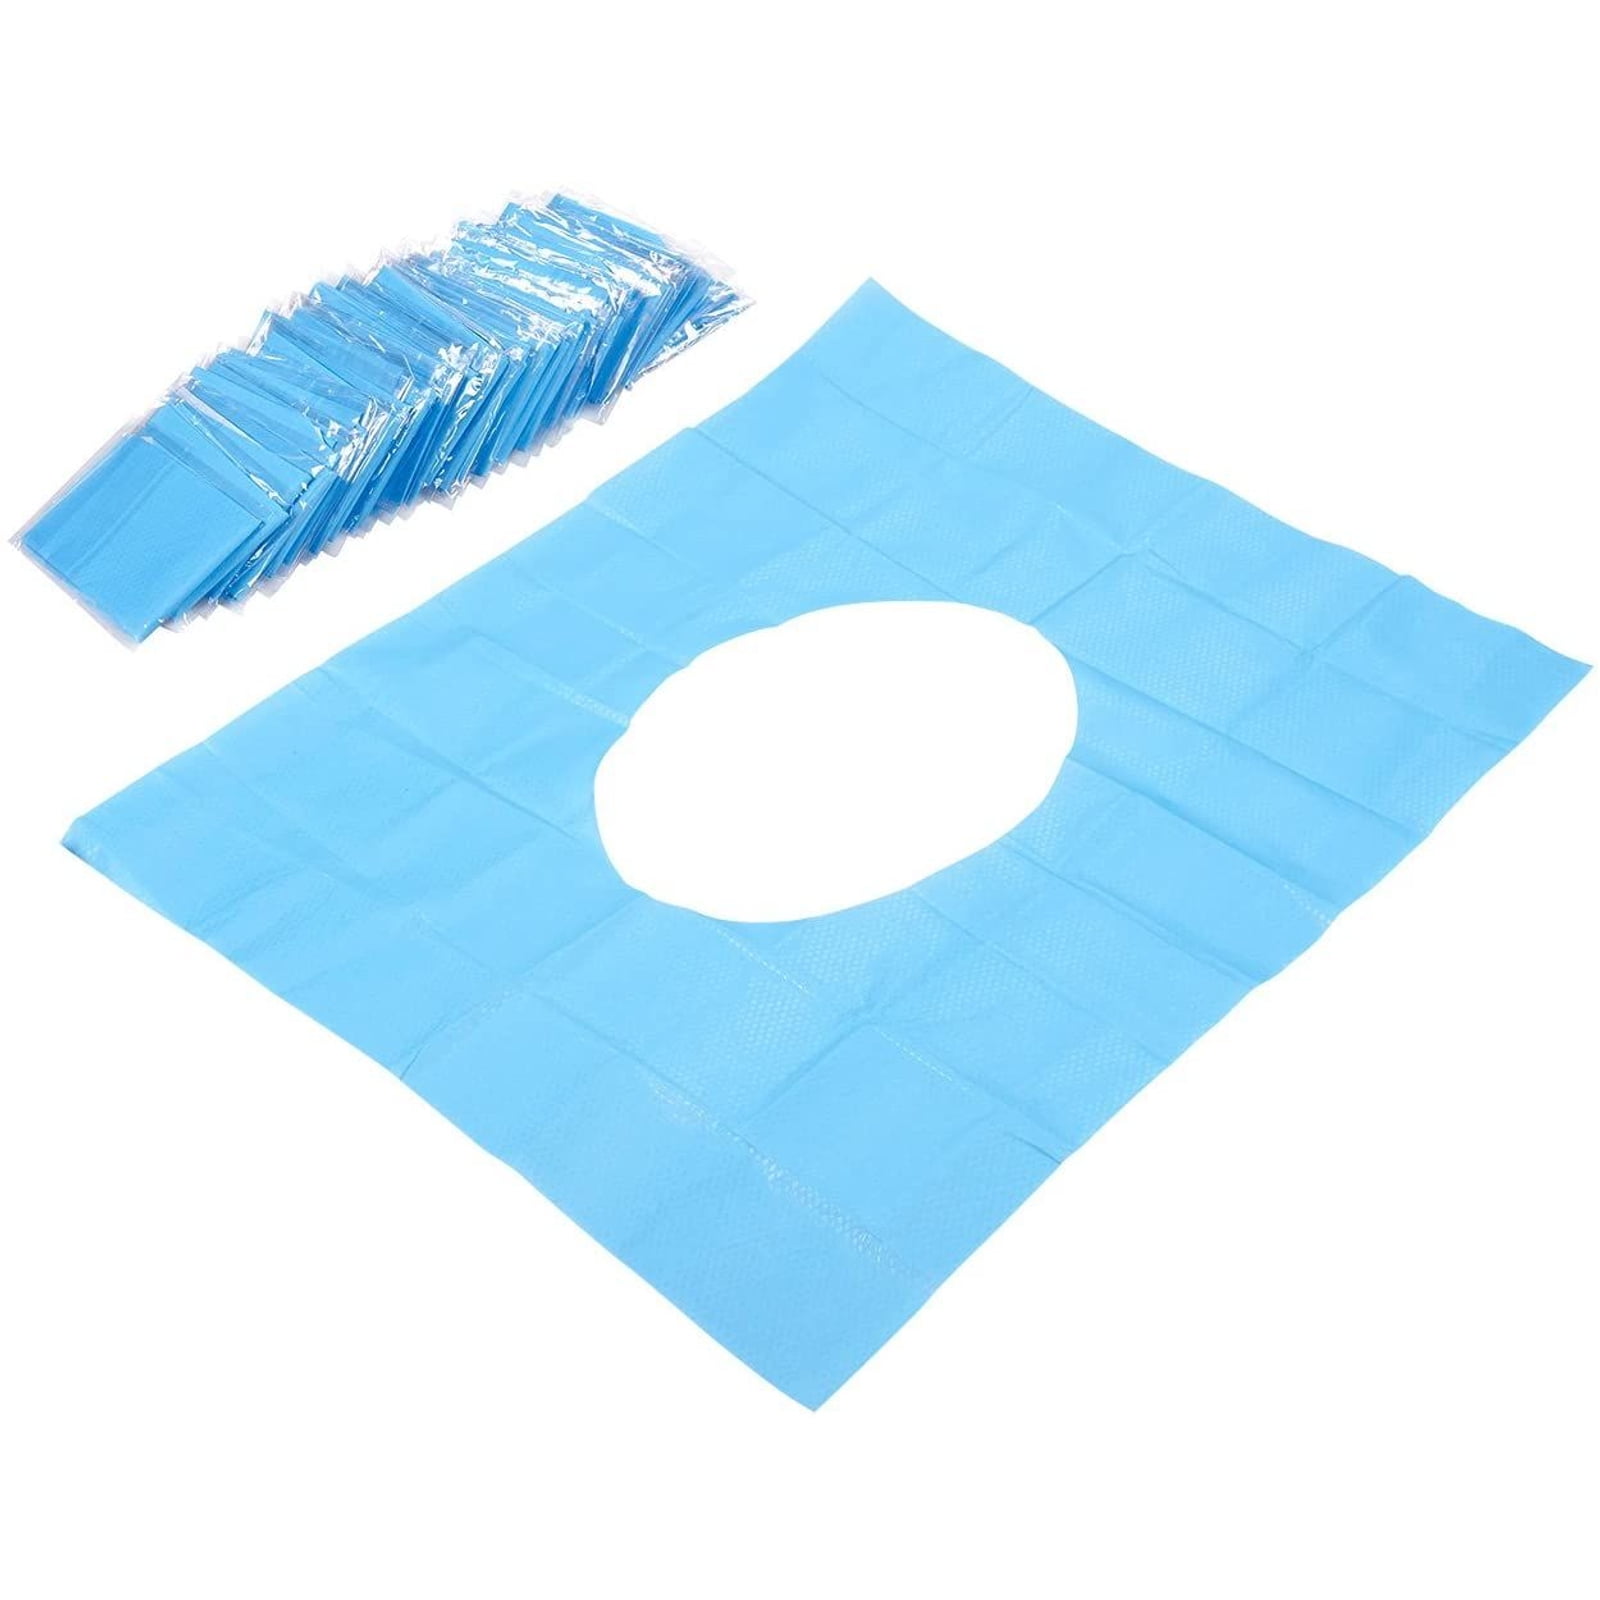 10 PCS Disposable Toilet Seat Cover Toilet Cover protective paper 